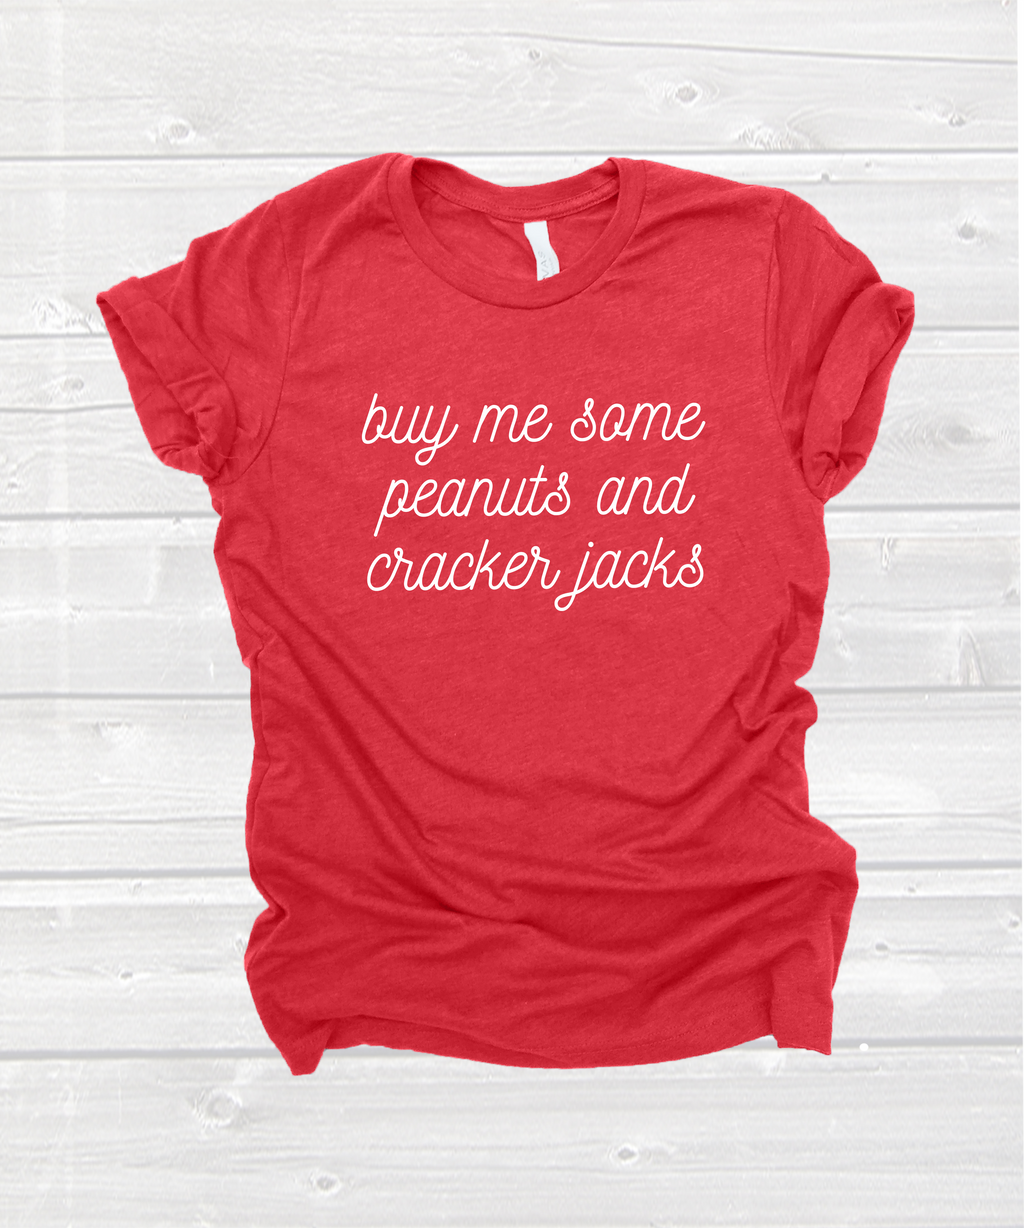 "buy me some peanuts and cracker jacks" tee in heather red